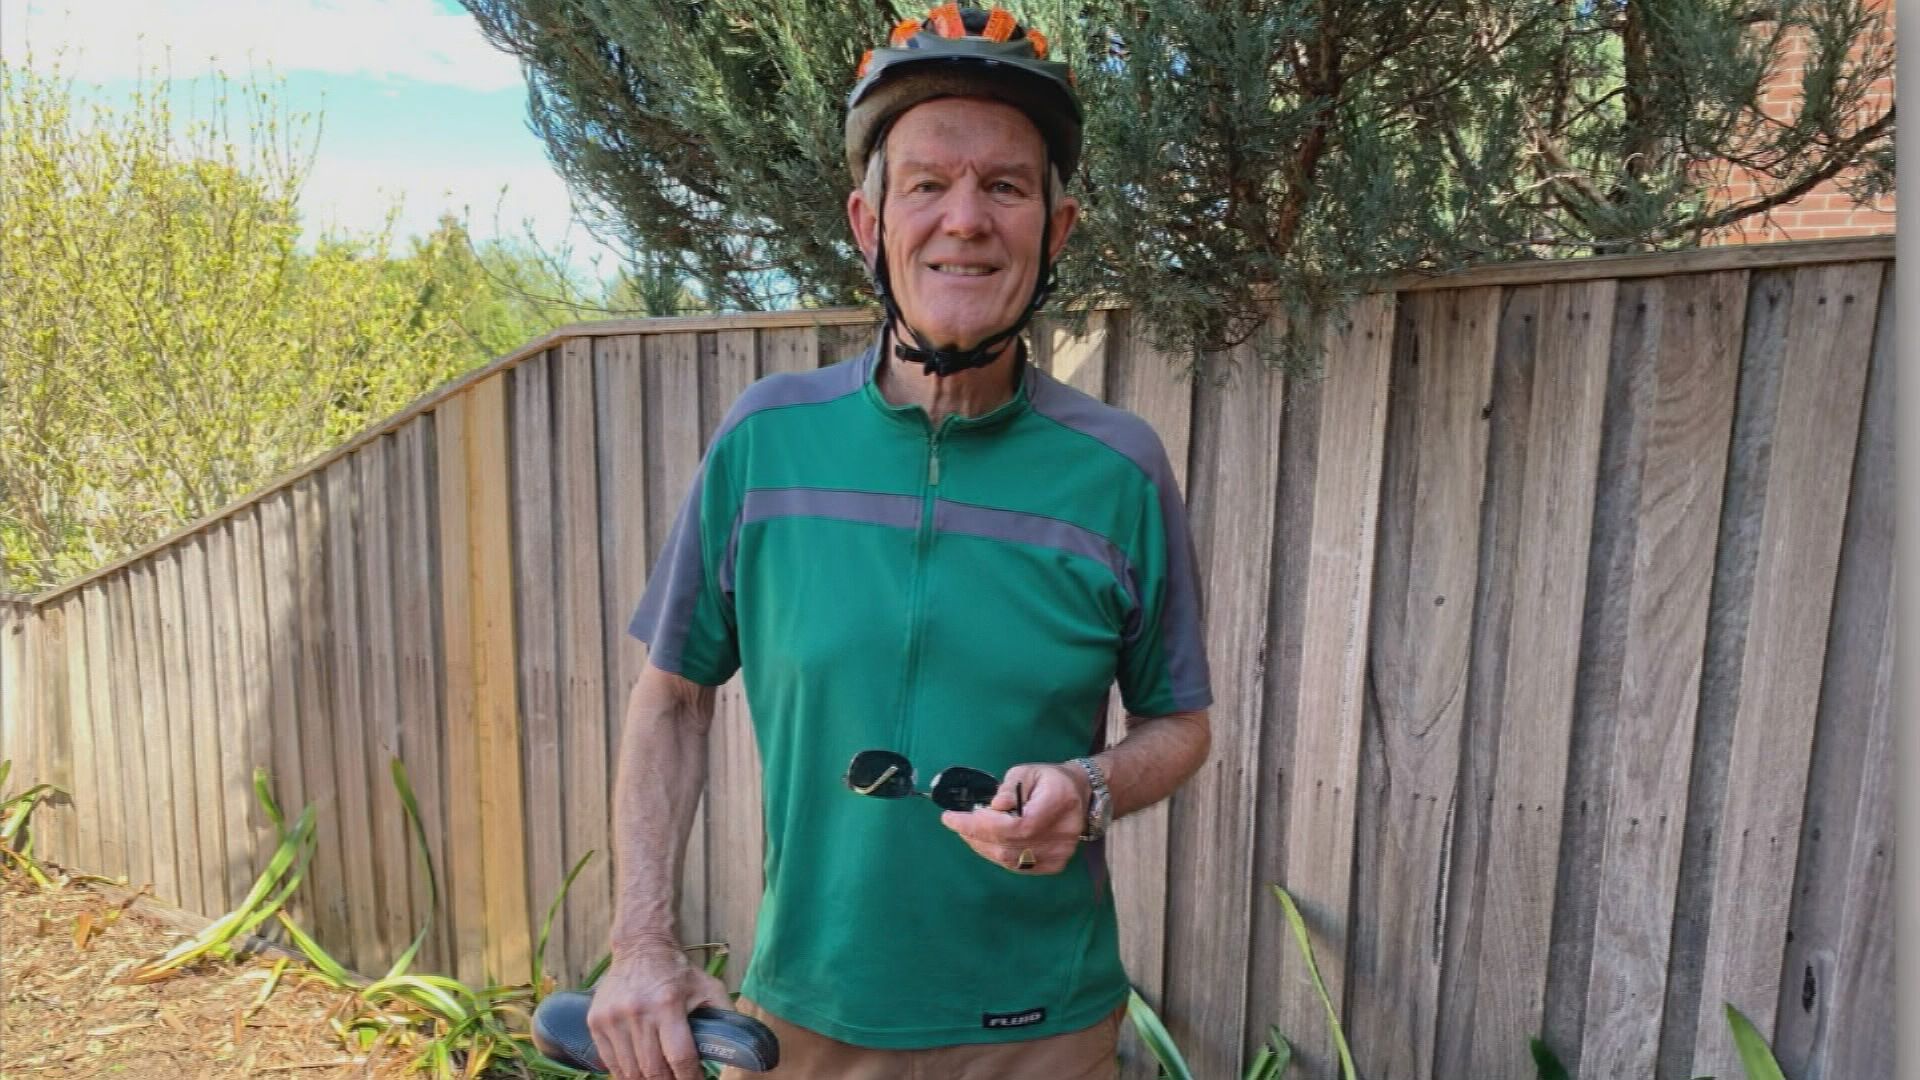 Melbourne cyclist Christiaan Nyssen needed major surgery after he was swooped and pecked in the eye on a ride in Yarrawonga in 2021.The patient made a full recovery, thanks to the hard work of Epworth Freemasons' eye surgeon Dr Elvis Ojaimi, who implanted an imported prosthetic iris and lens to fix the damaged eye.